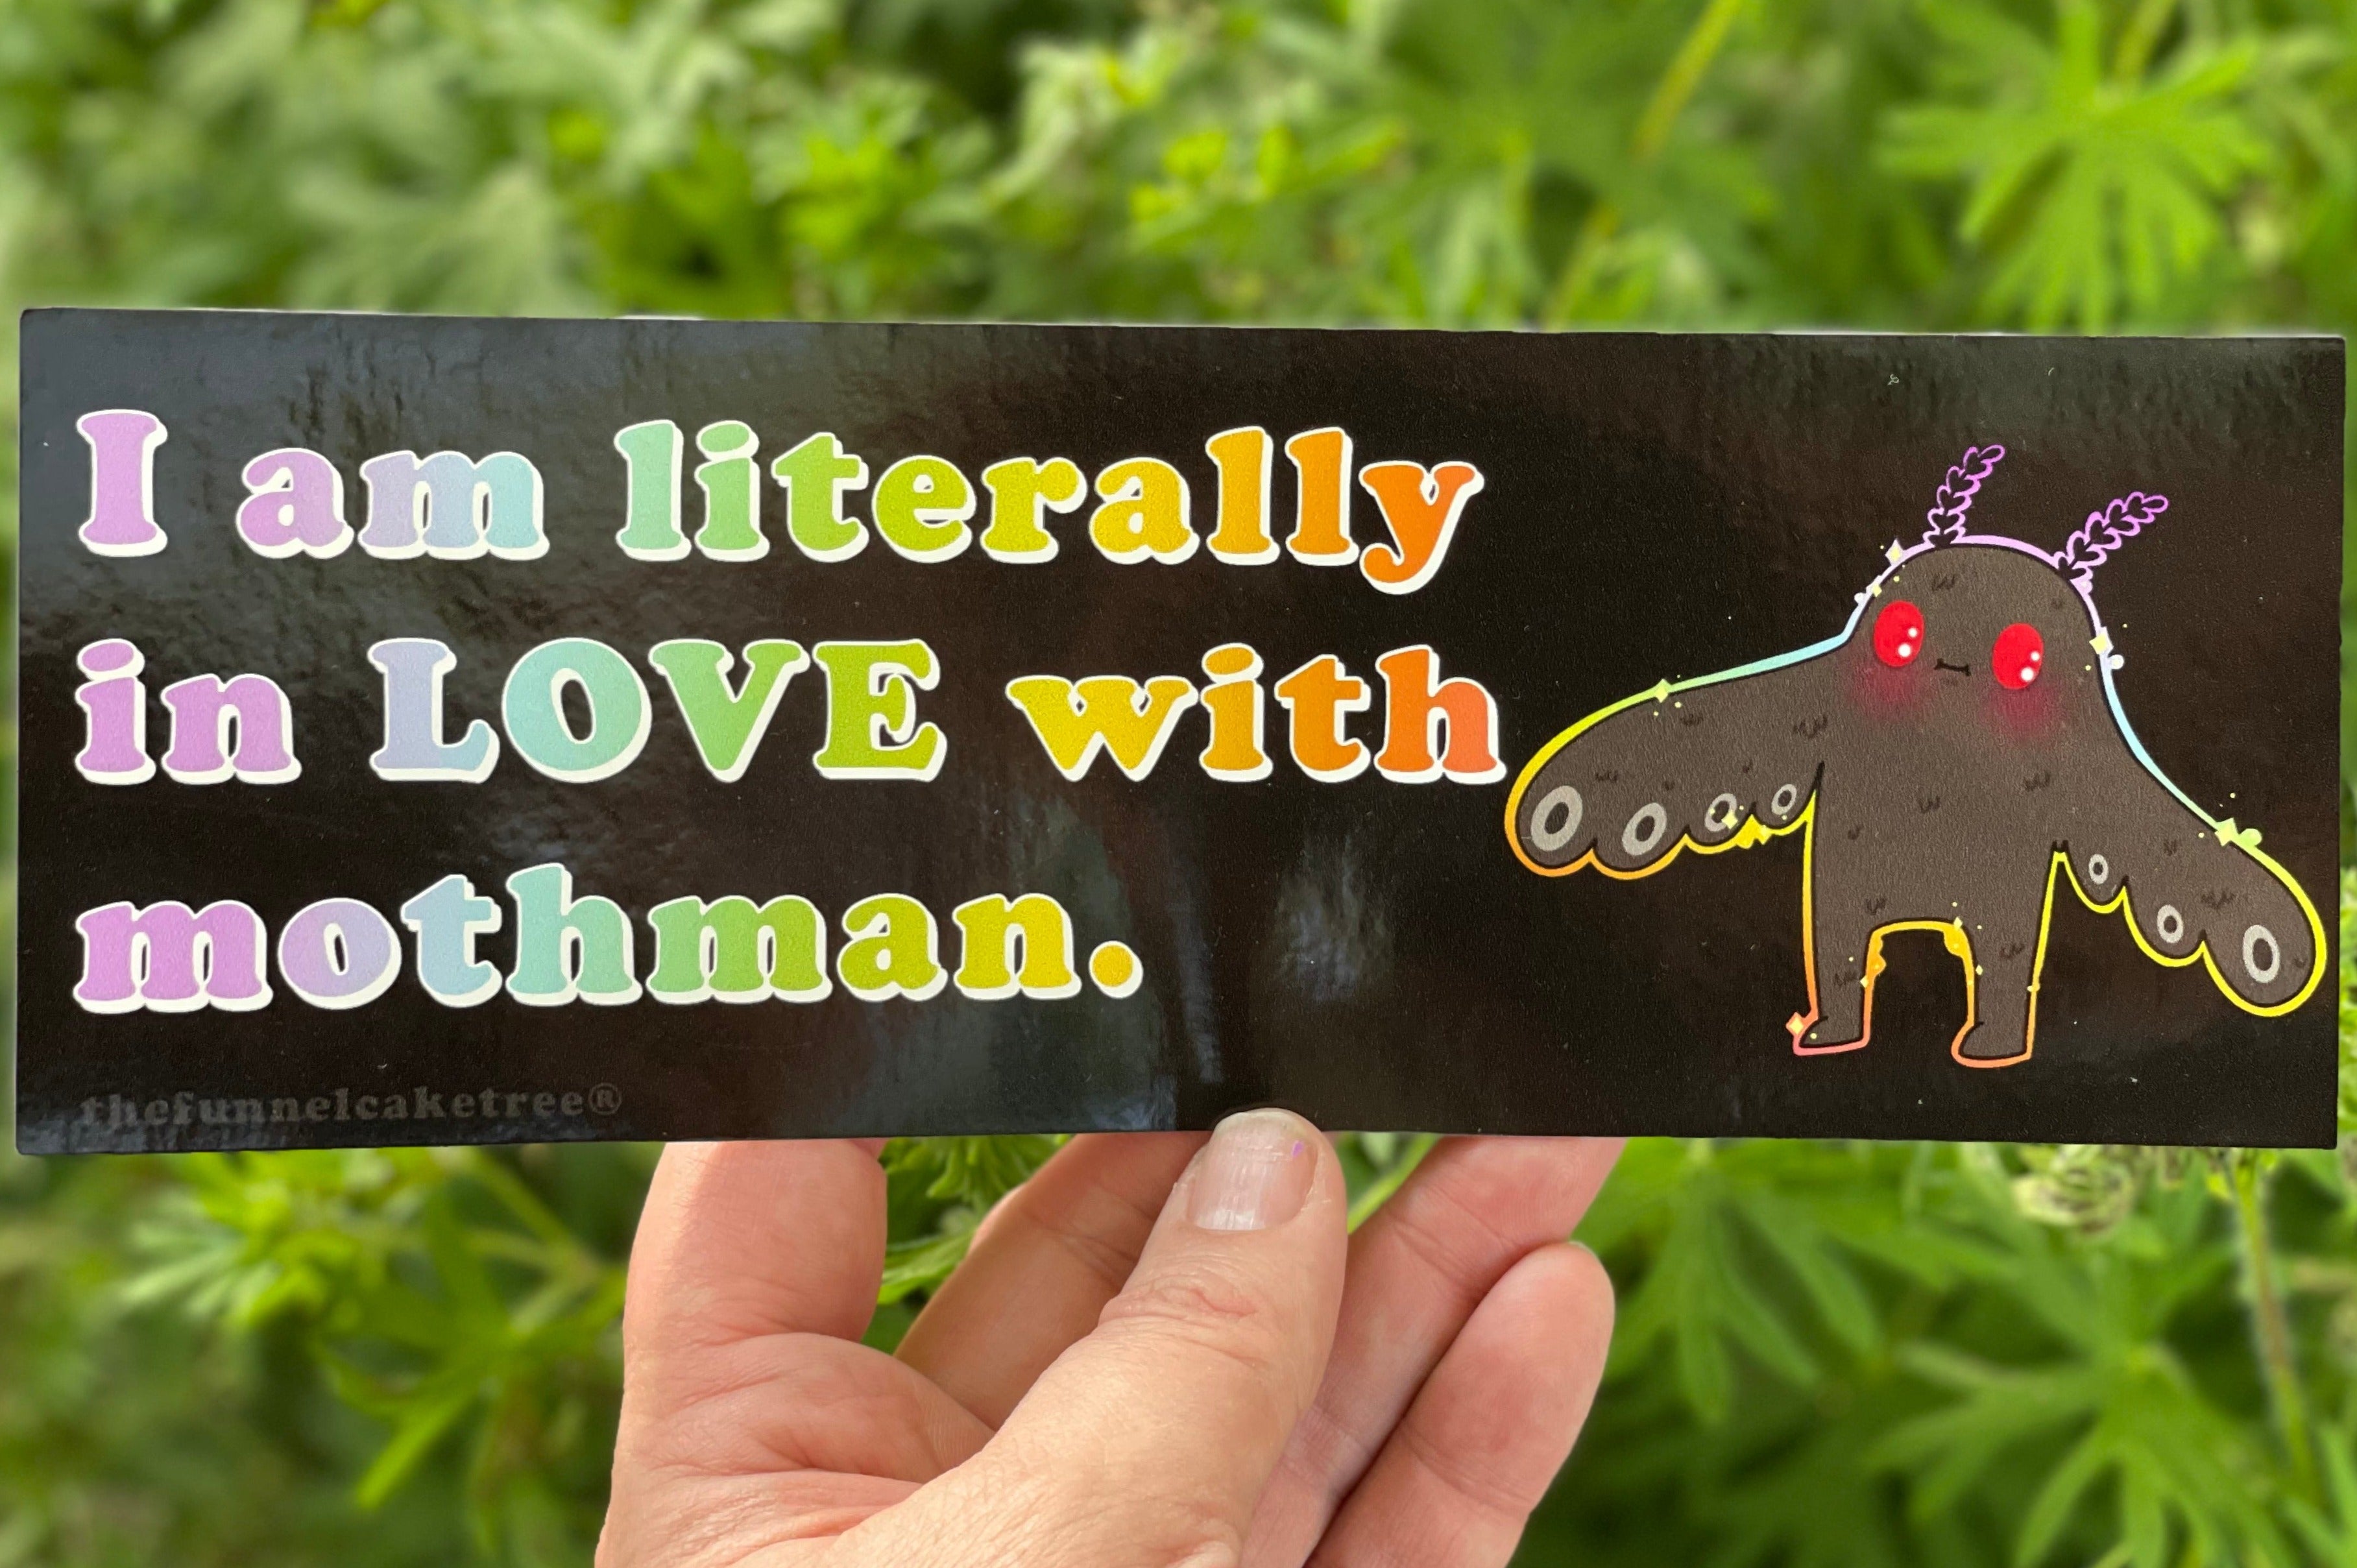 I am literally in LOVE with mothman